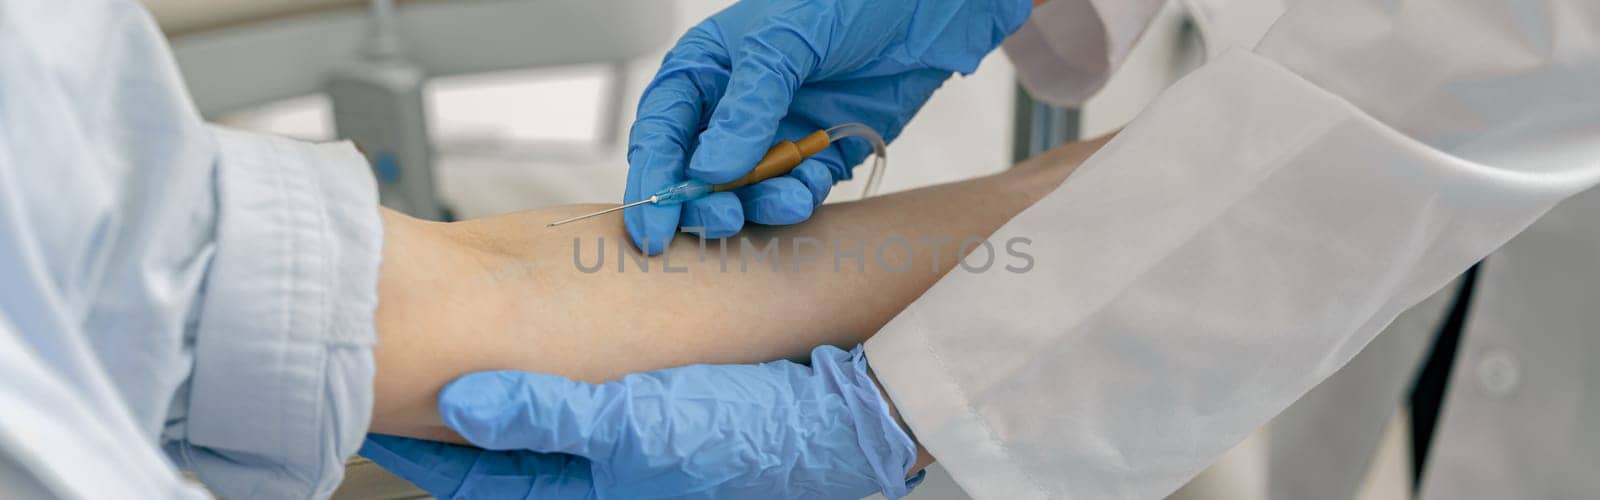 Close-up of doctor putting an IV drip to patient intravenously in hospital ward by Yaroslav_astakhov